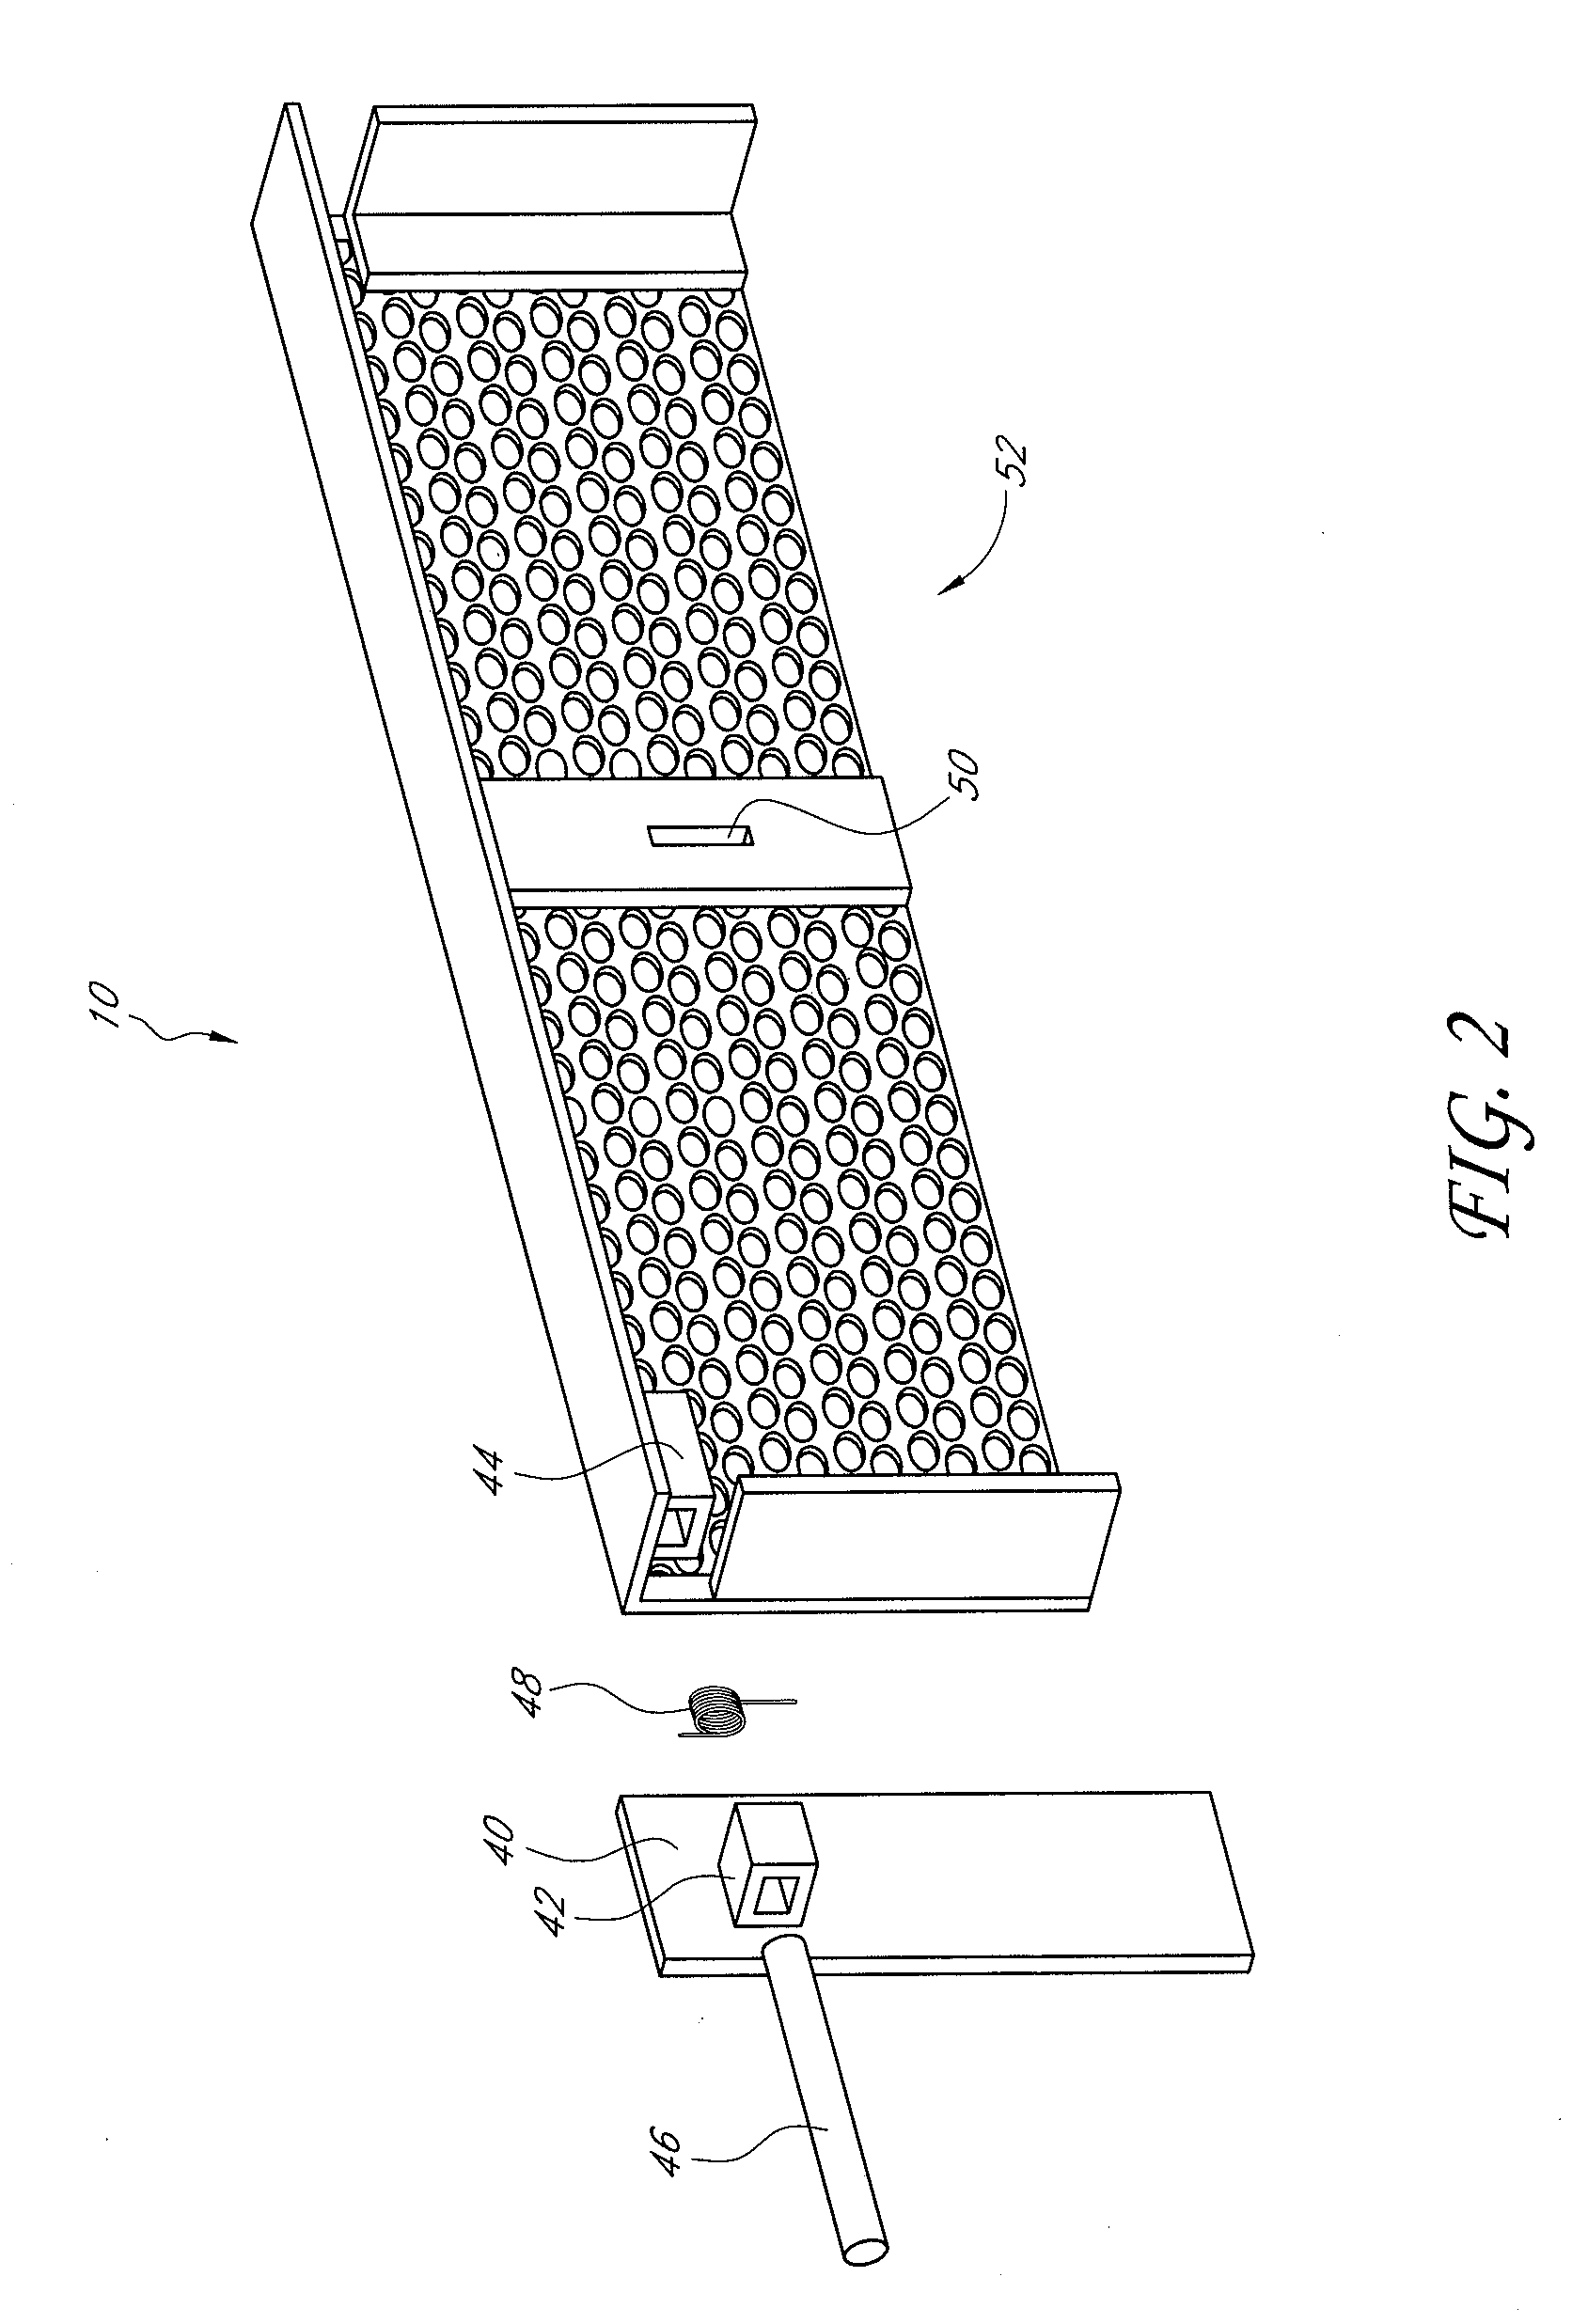 Drain grate system and methods